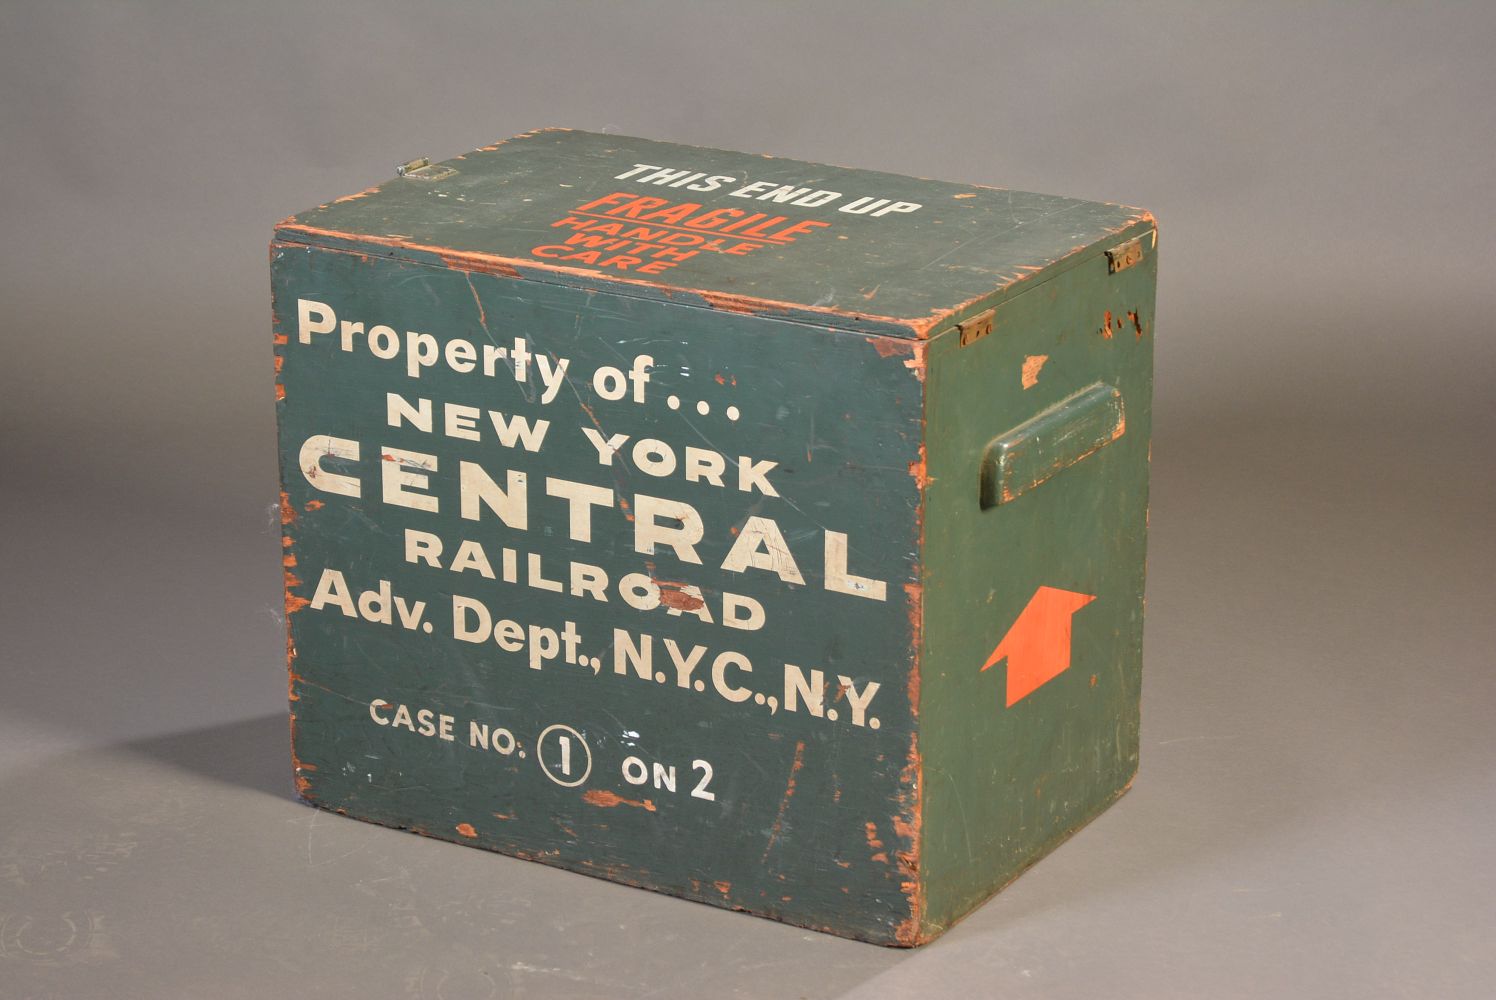 A SHIPPING CRATE FOR NEW YORK CENTRAL RR ADV. DEPT